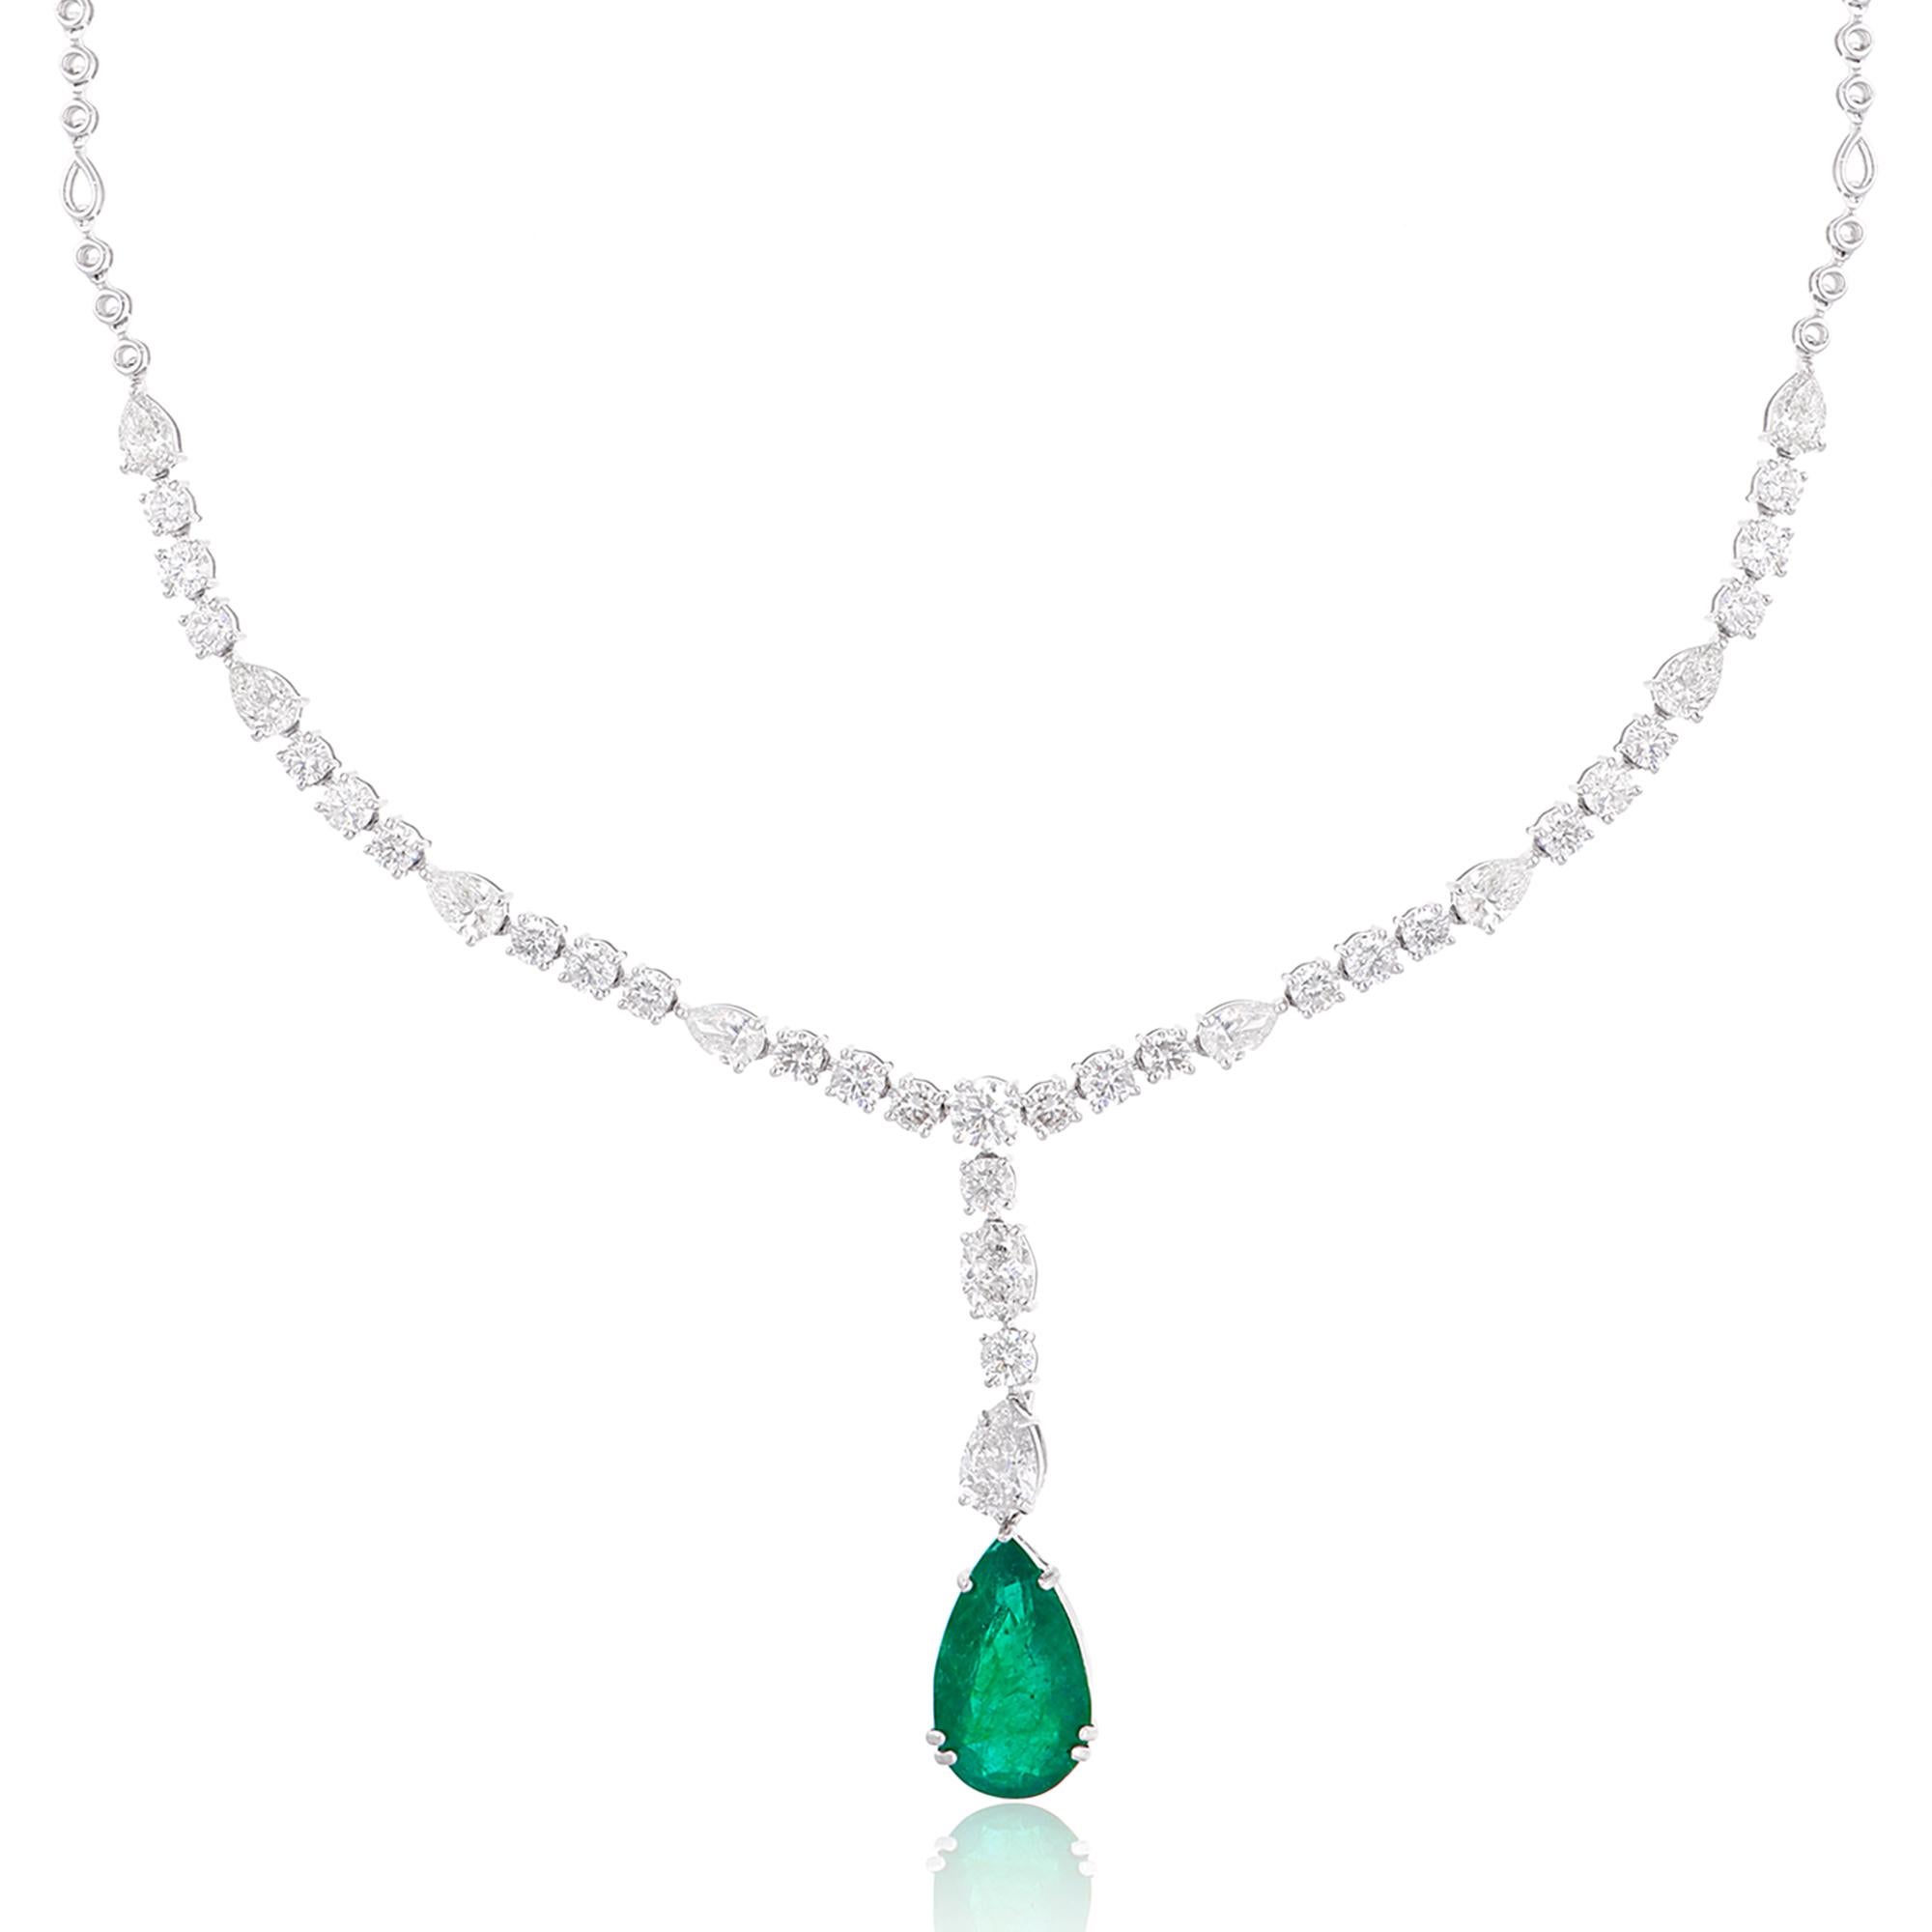 Adorn yourself with the timeless beauty of this Pear Shape Natural Emerald Gemstone Necklace. Crafted in 18-karat white gold, this exquisite piece of fine jewelry features a captivating pear-shaped emerald, delicately enhanced by shimmering